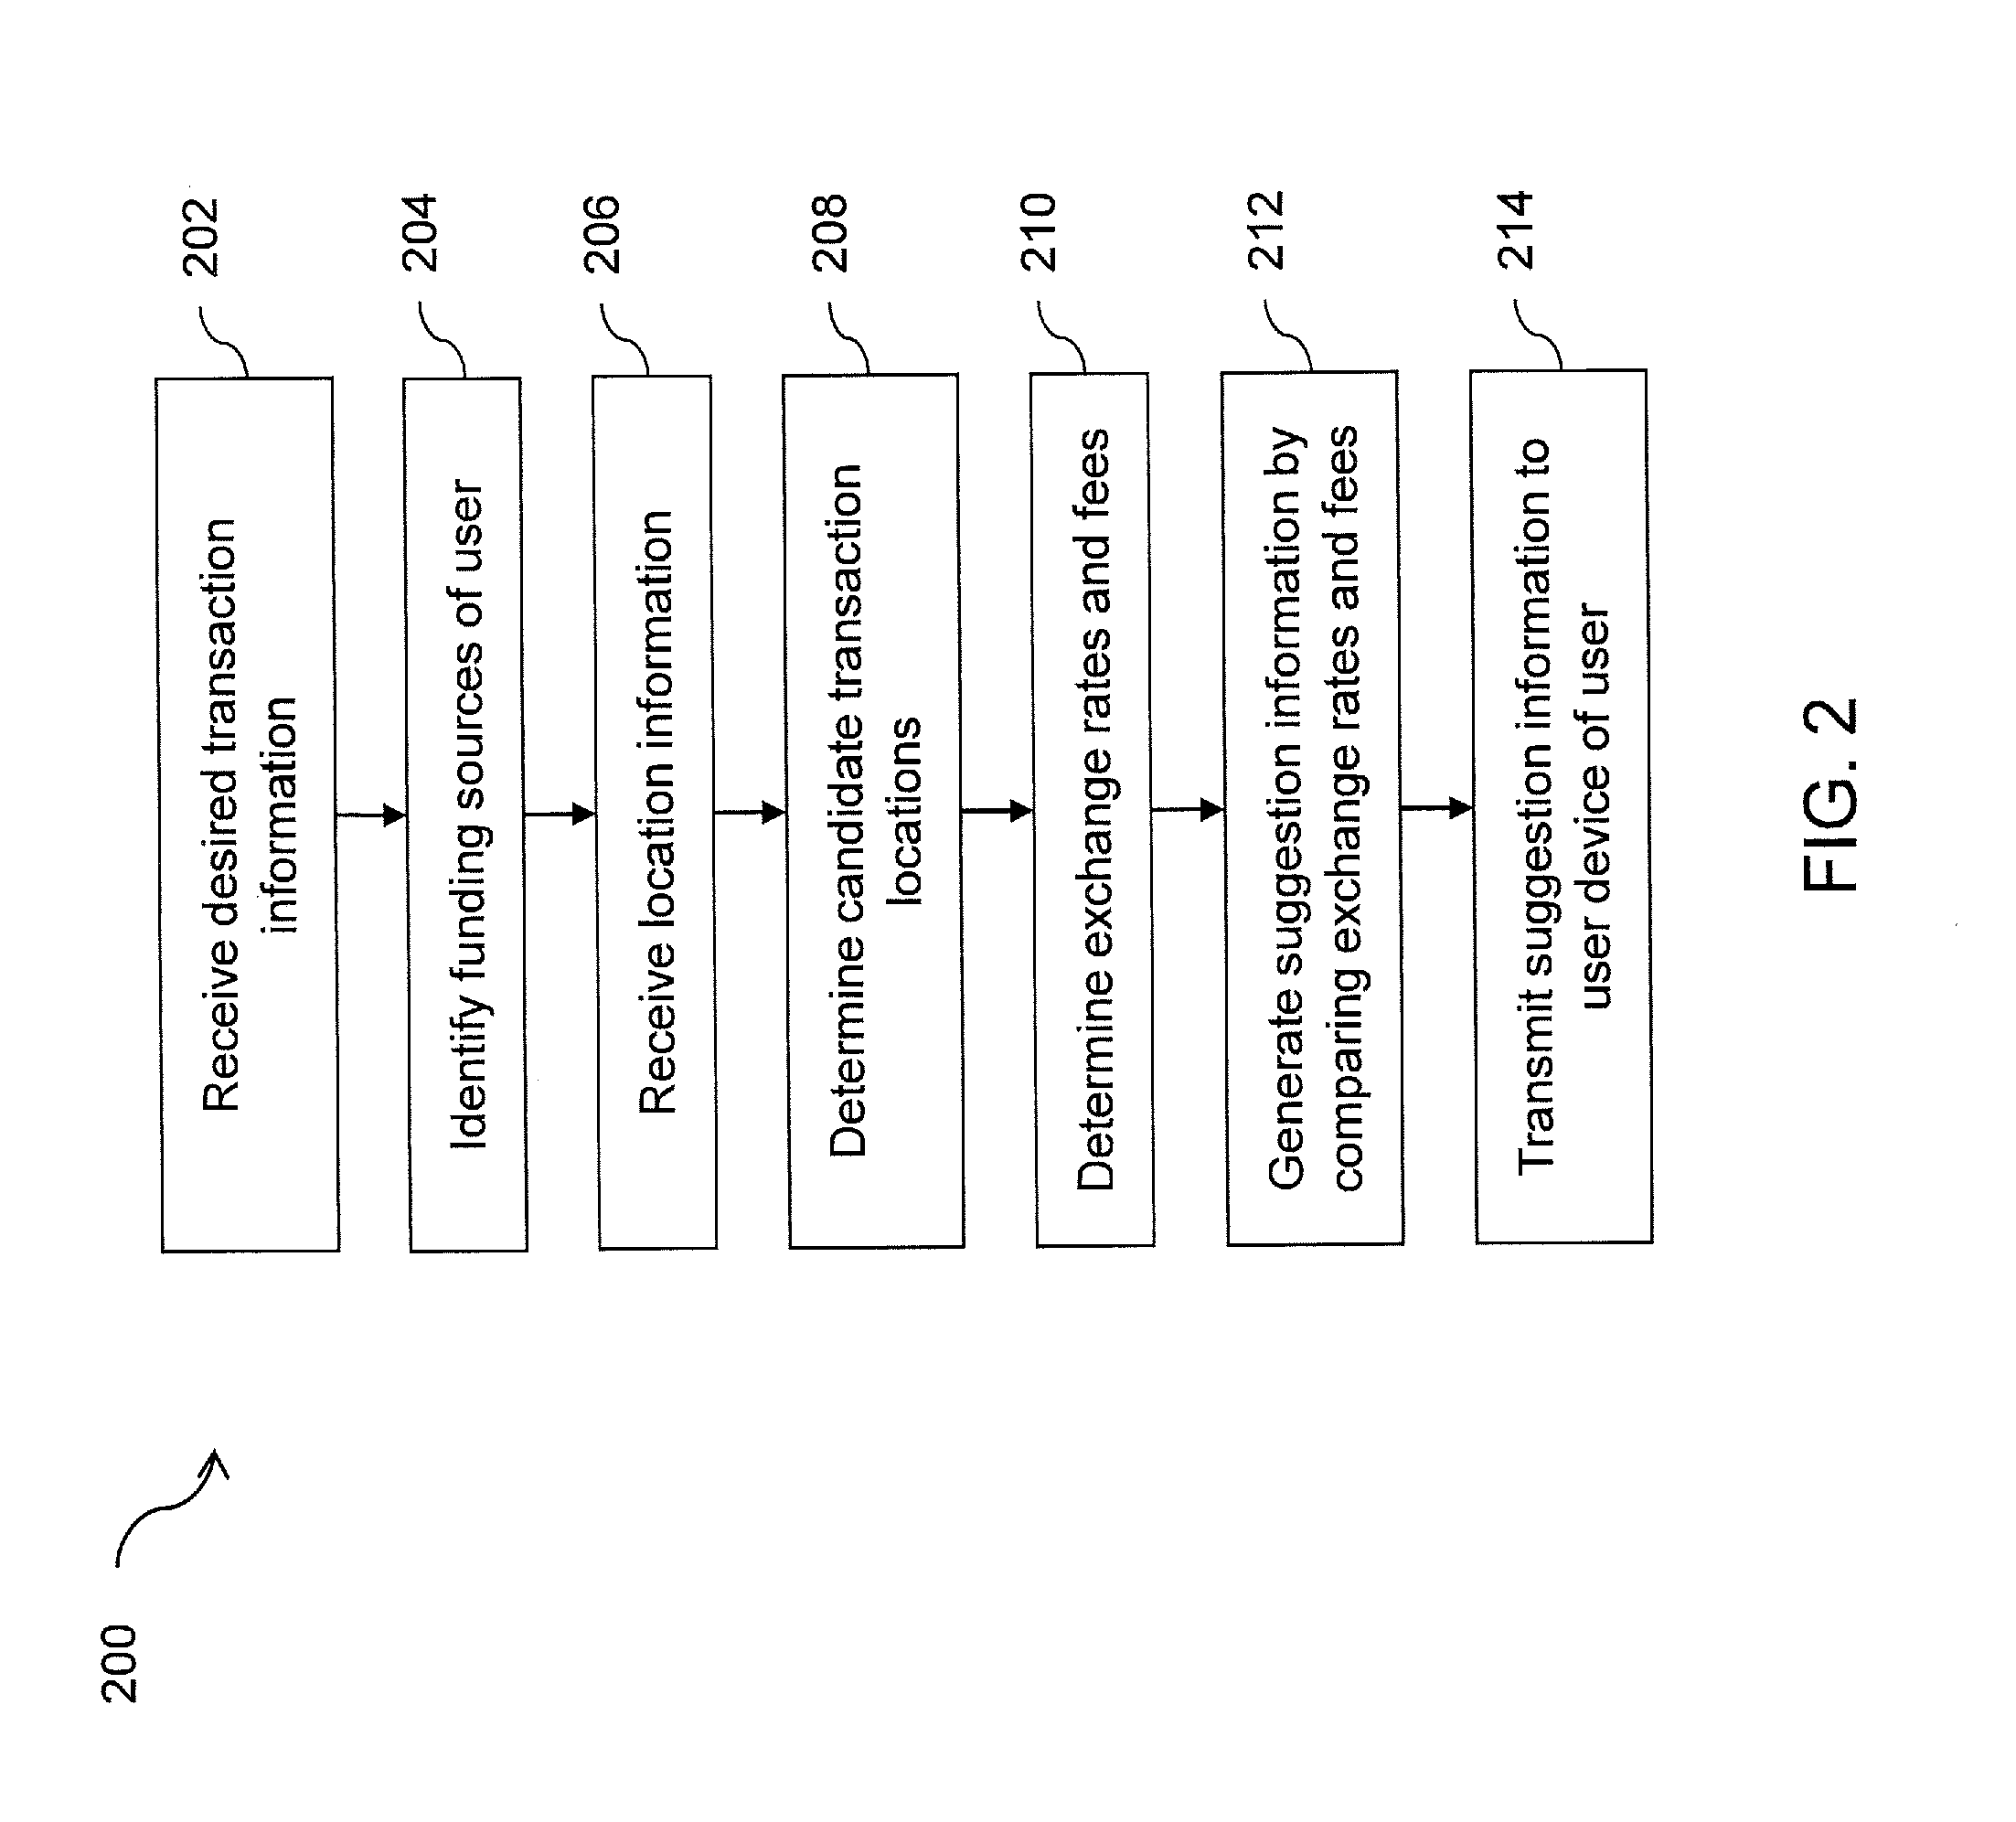 Systems and methods for generating suggestions and enforcing transaction restrictions